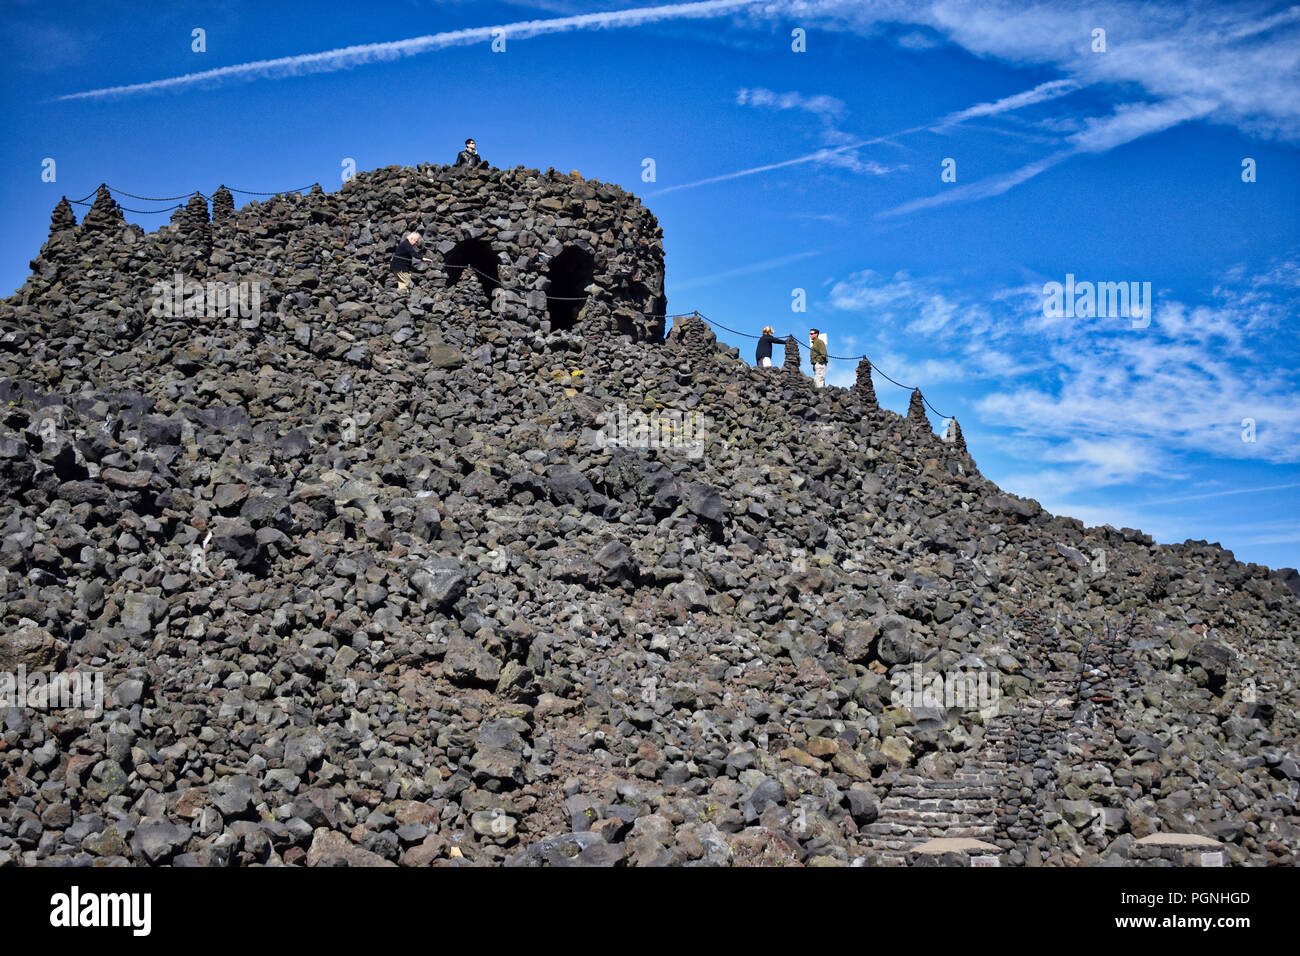 Dee Wright Observatory on the old McKenzie Highway in Oregon Stock Photo